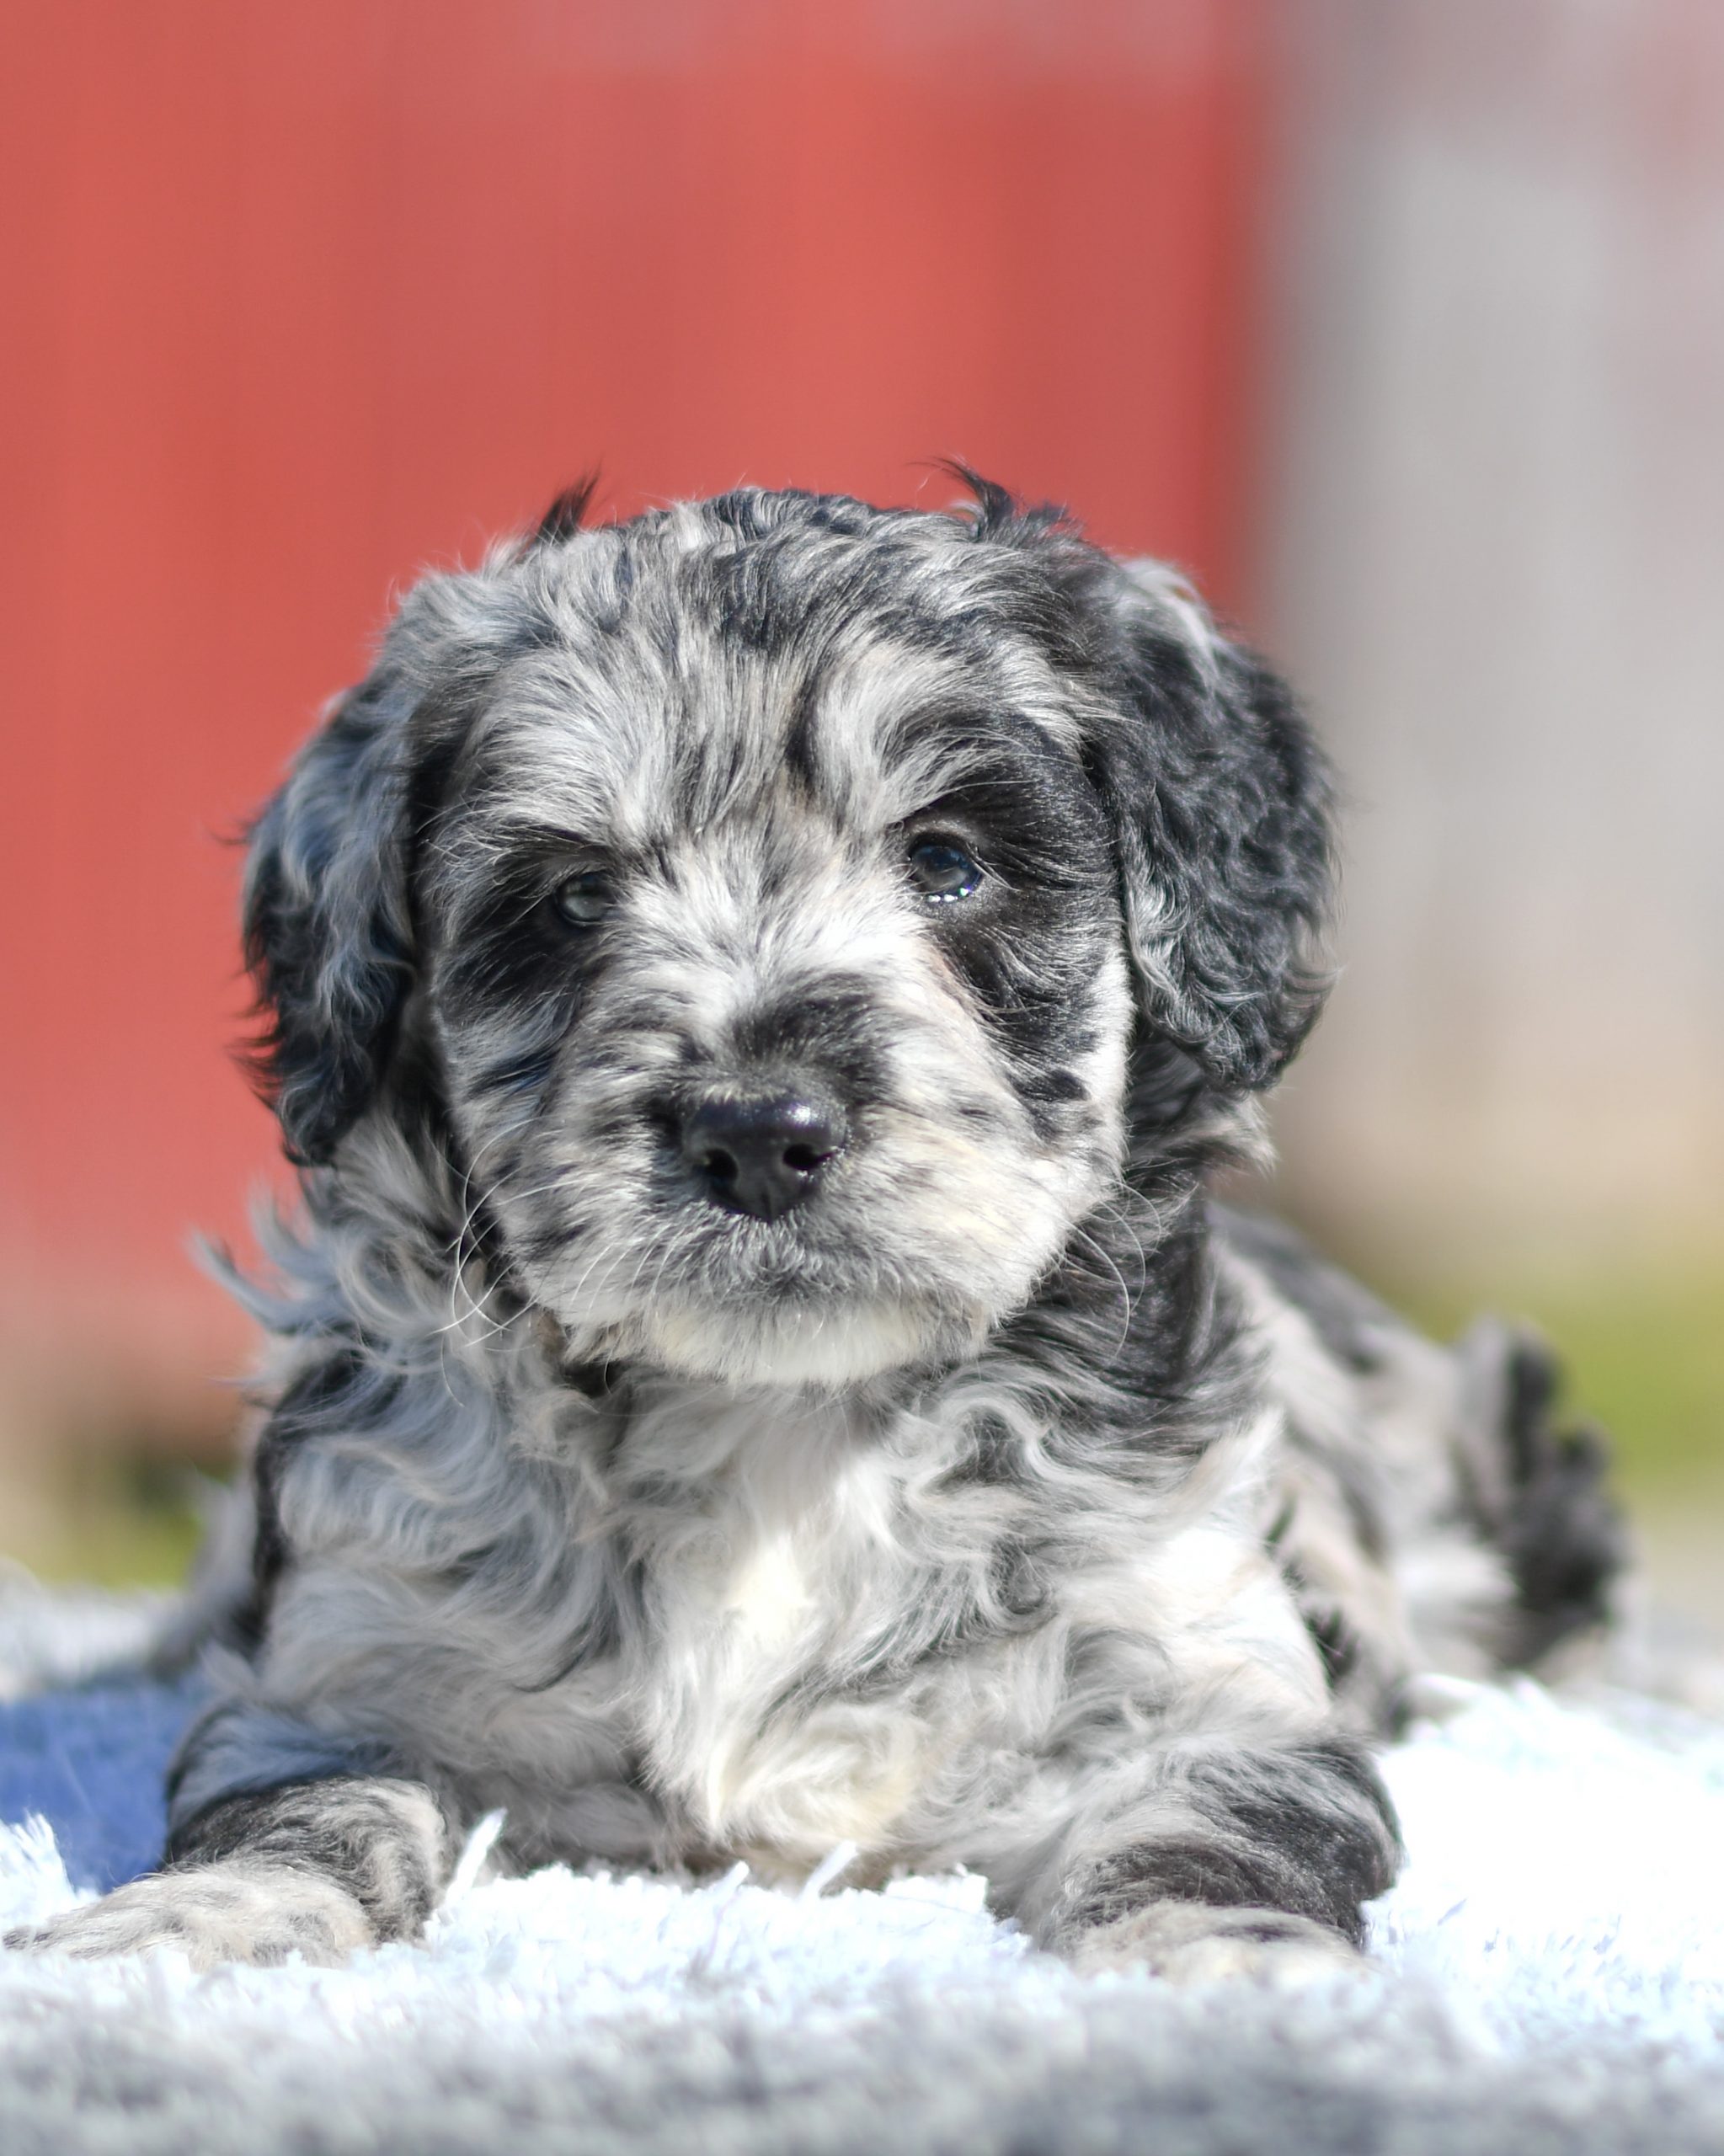 Beautiful Puppies at play. For sale mini aussiedoodles playful puppies of Ohio. Cute and cuddly playful mini aussiedoodle pups for sale